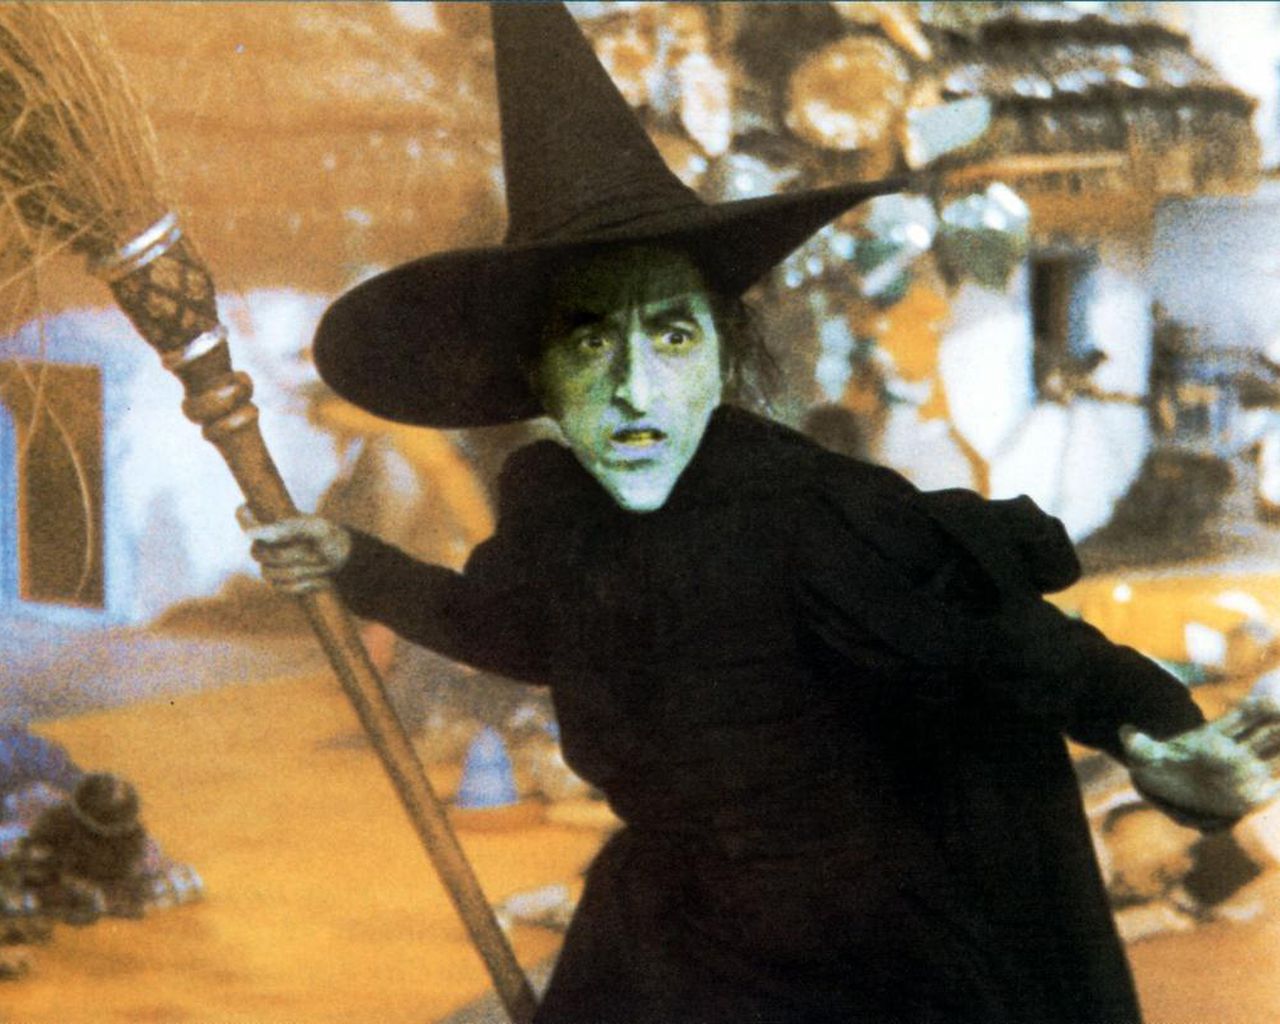 the wizard of oz wicked witch of the west